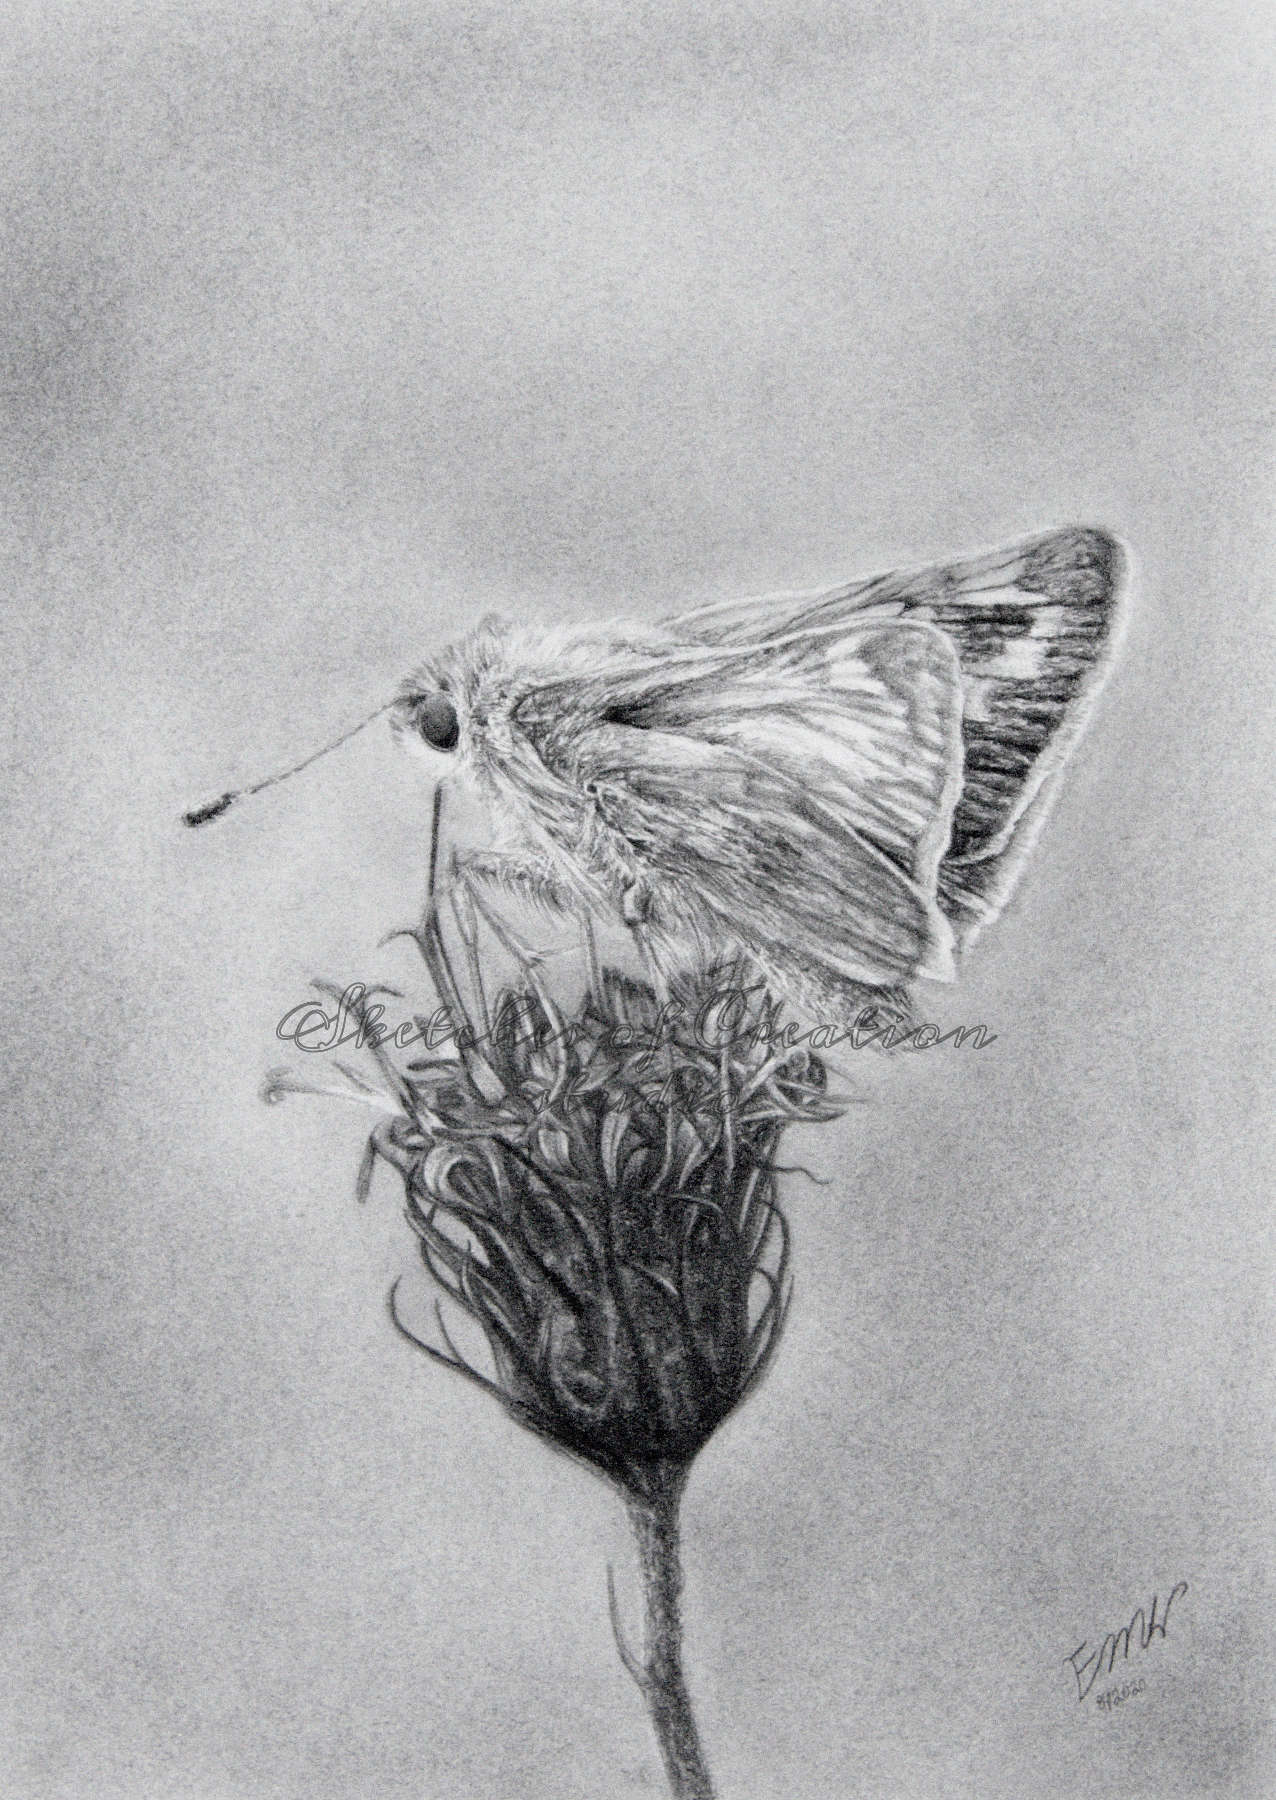 'Skipper' a drawing of a Skipper butterfly on Ironweed